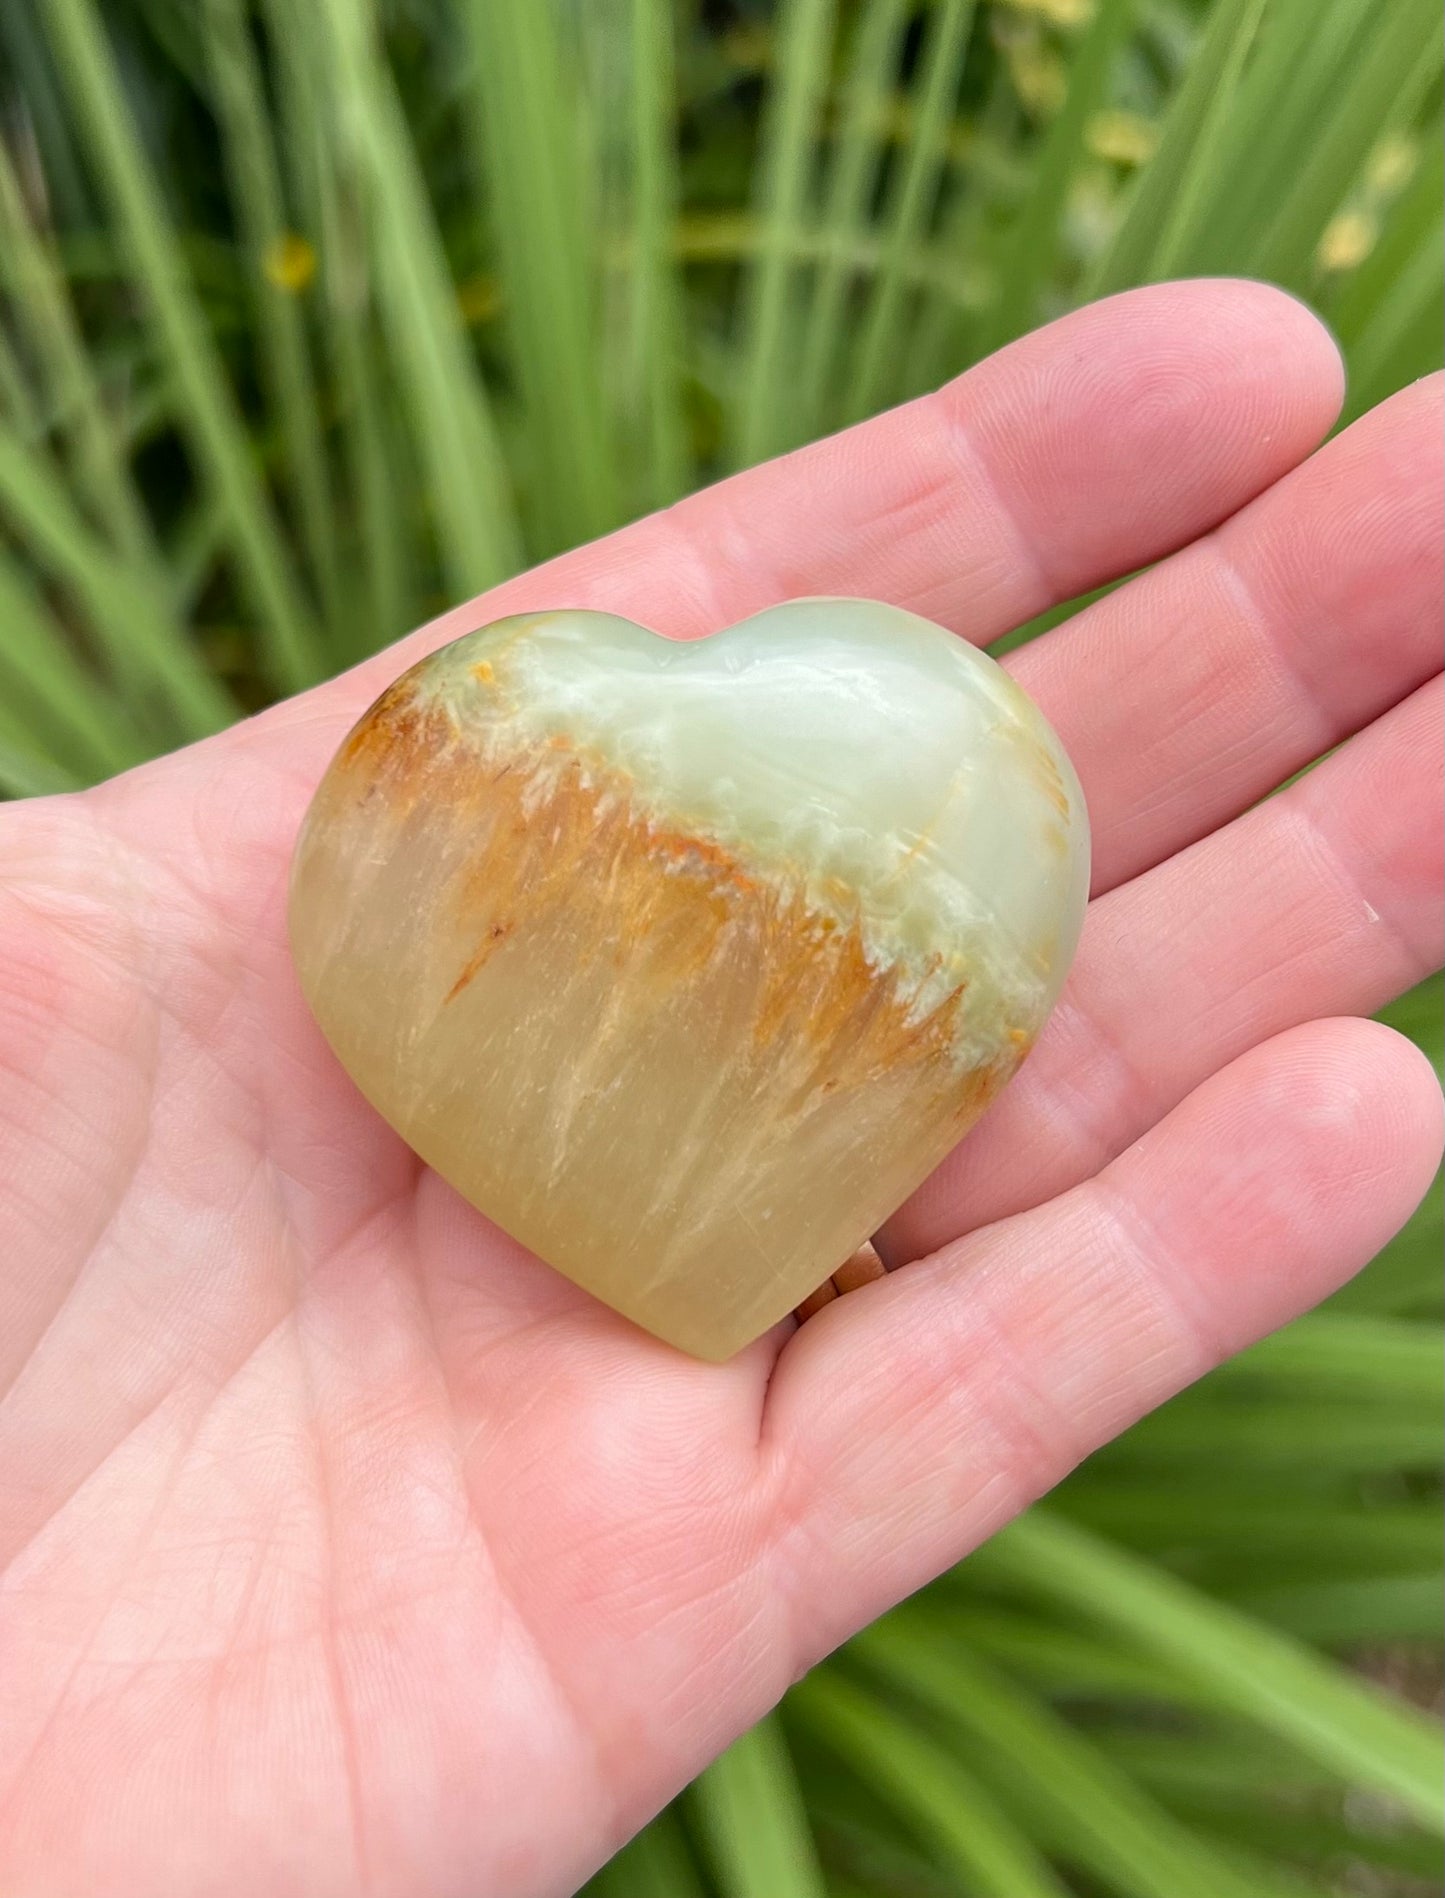 Lemon and Banded Green Calcite Calcite Heart